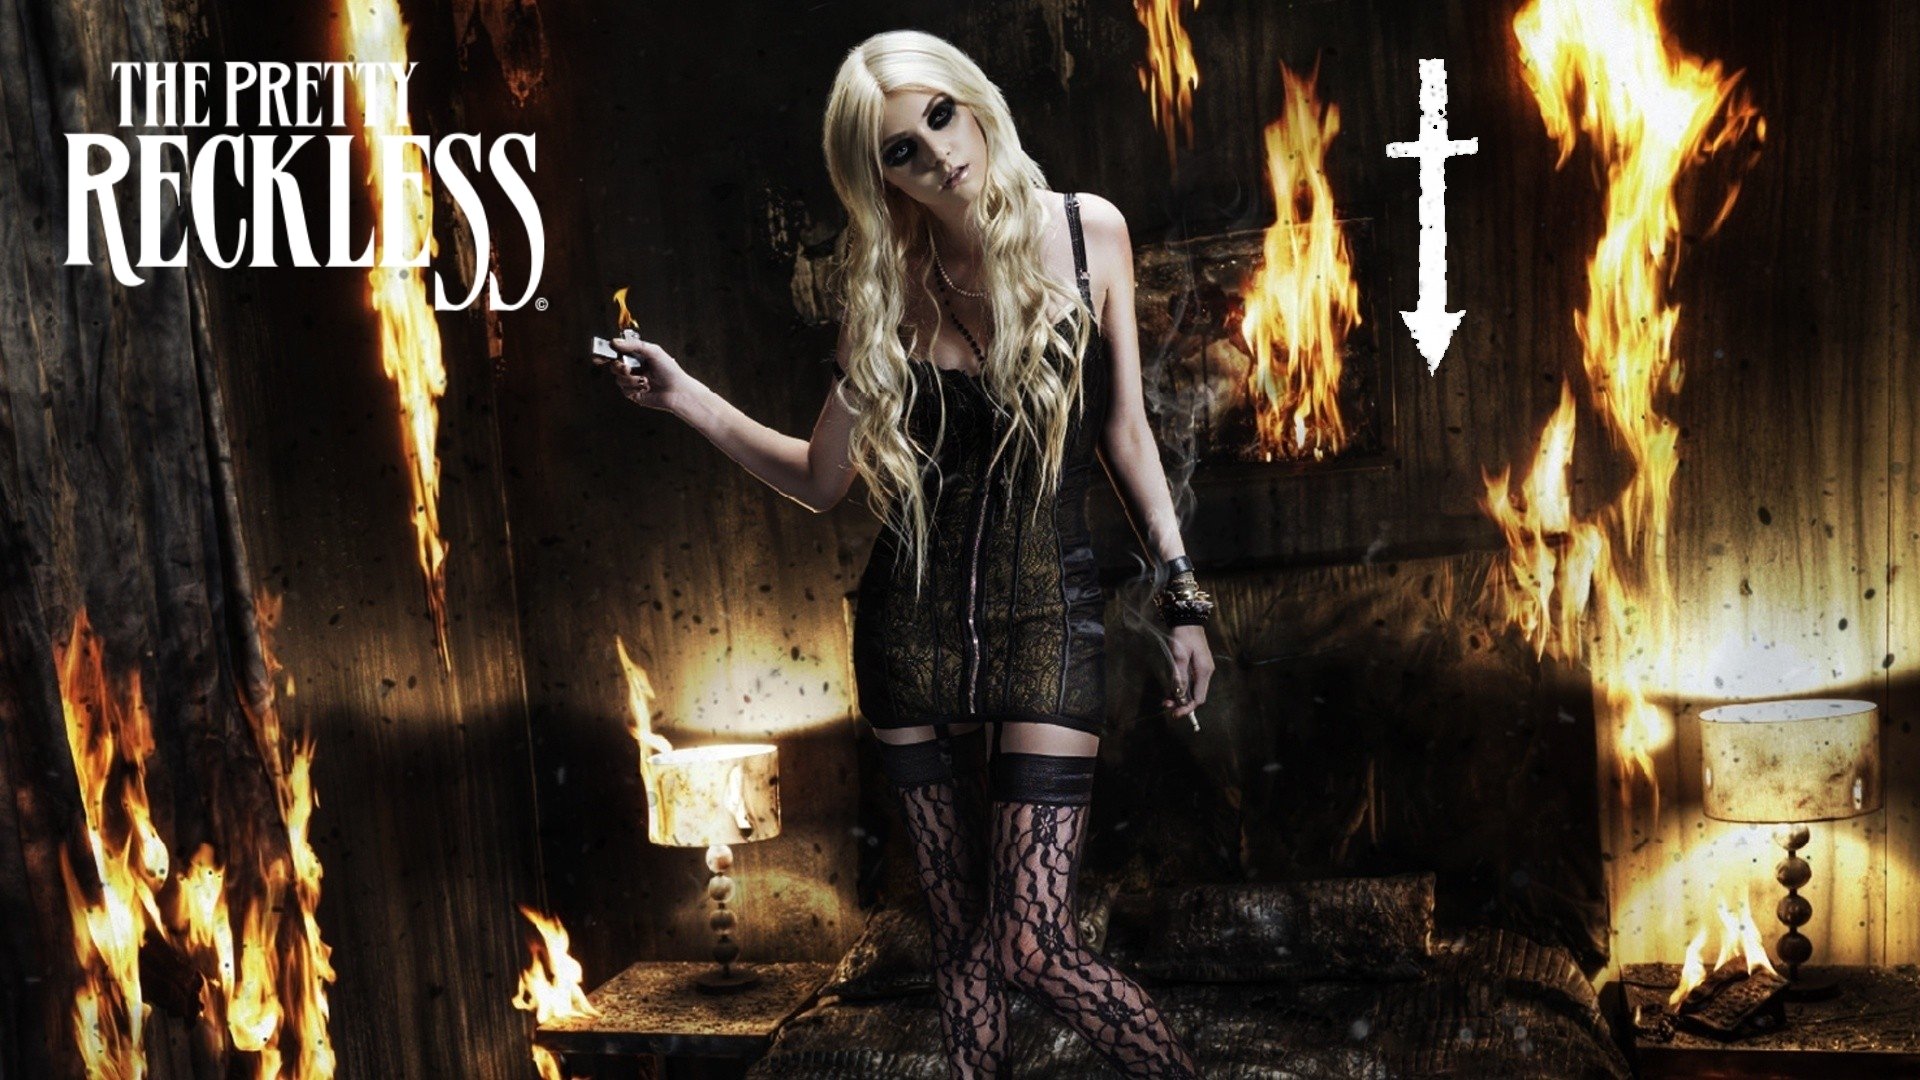 The Pretty Reckless Wallpapers, Hintergründe | 1920x1080 | ID:479137